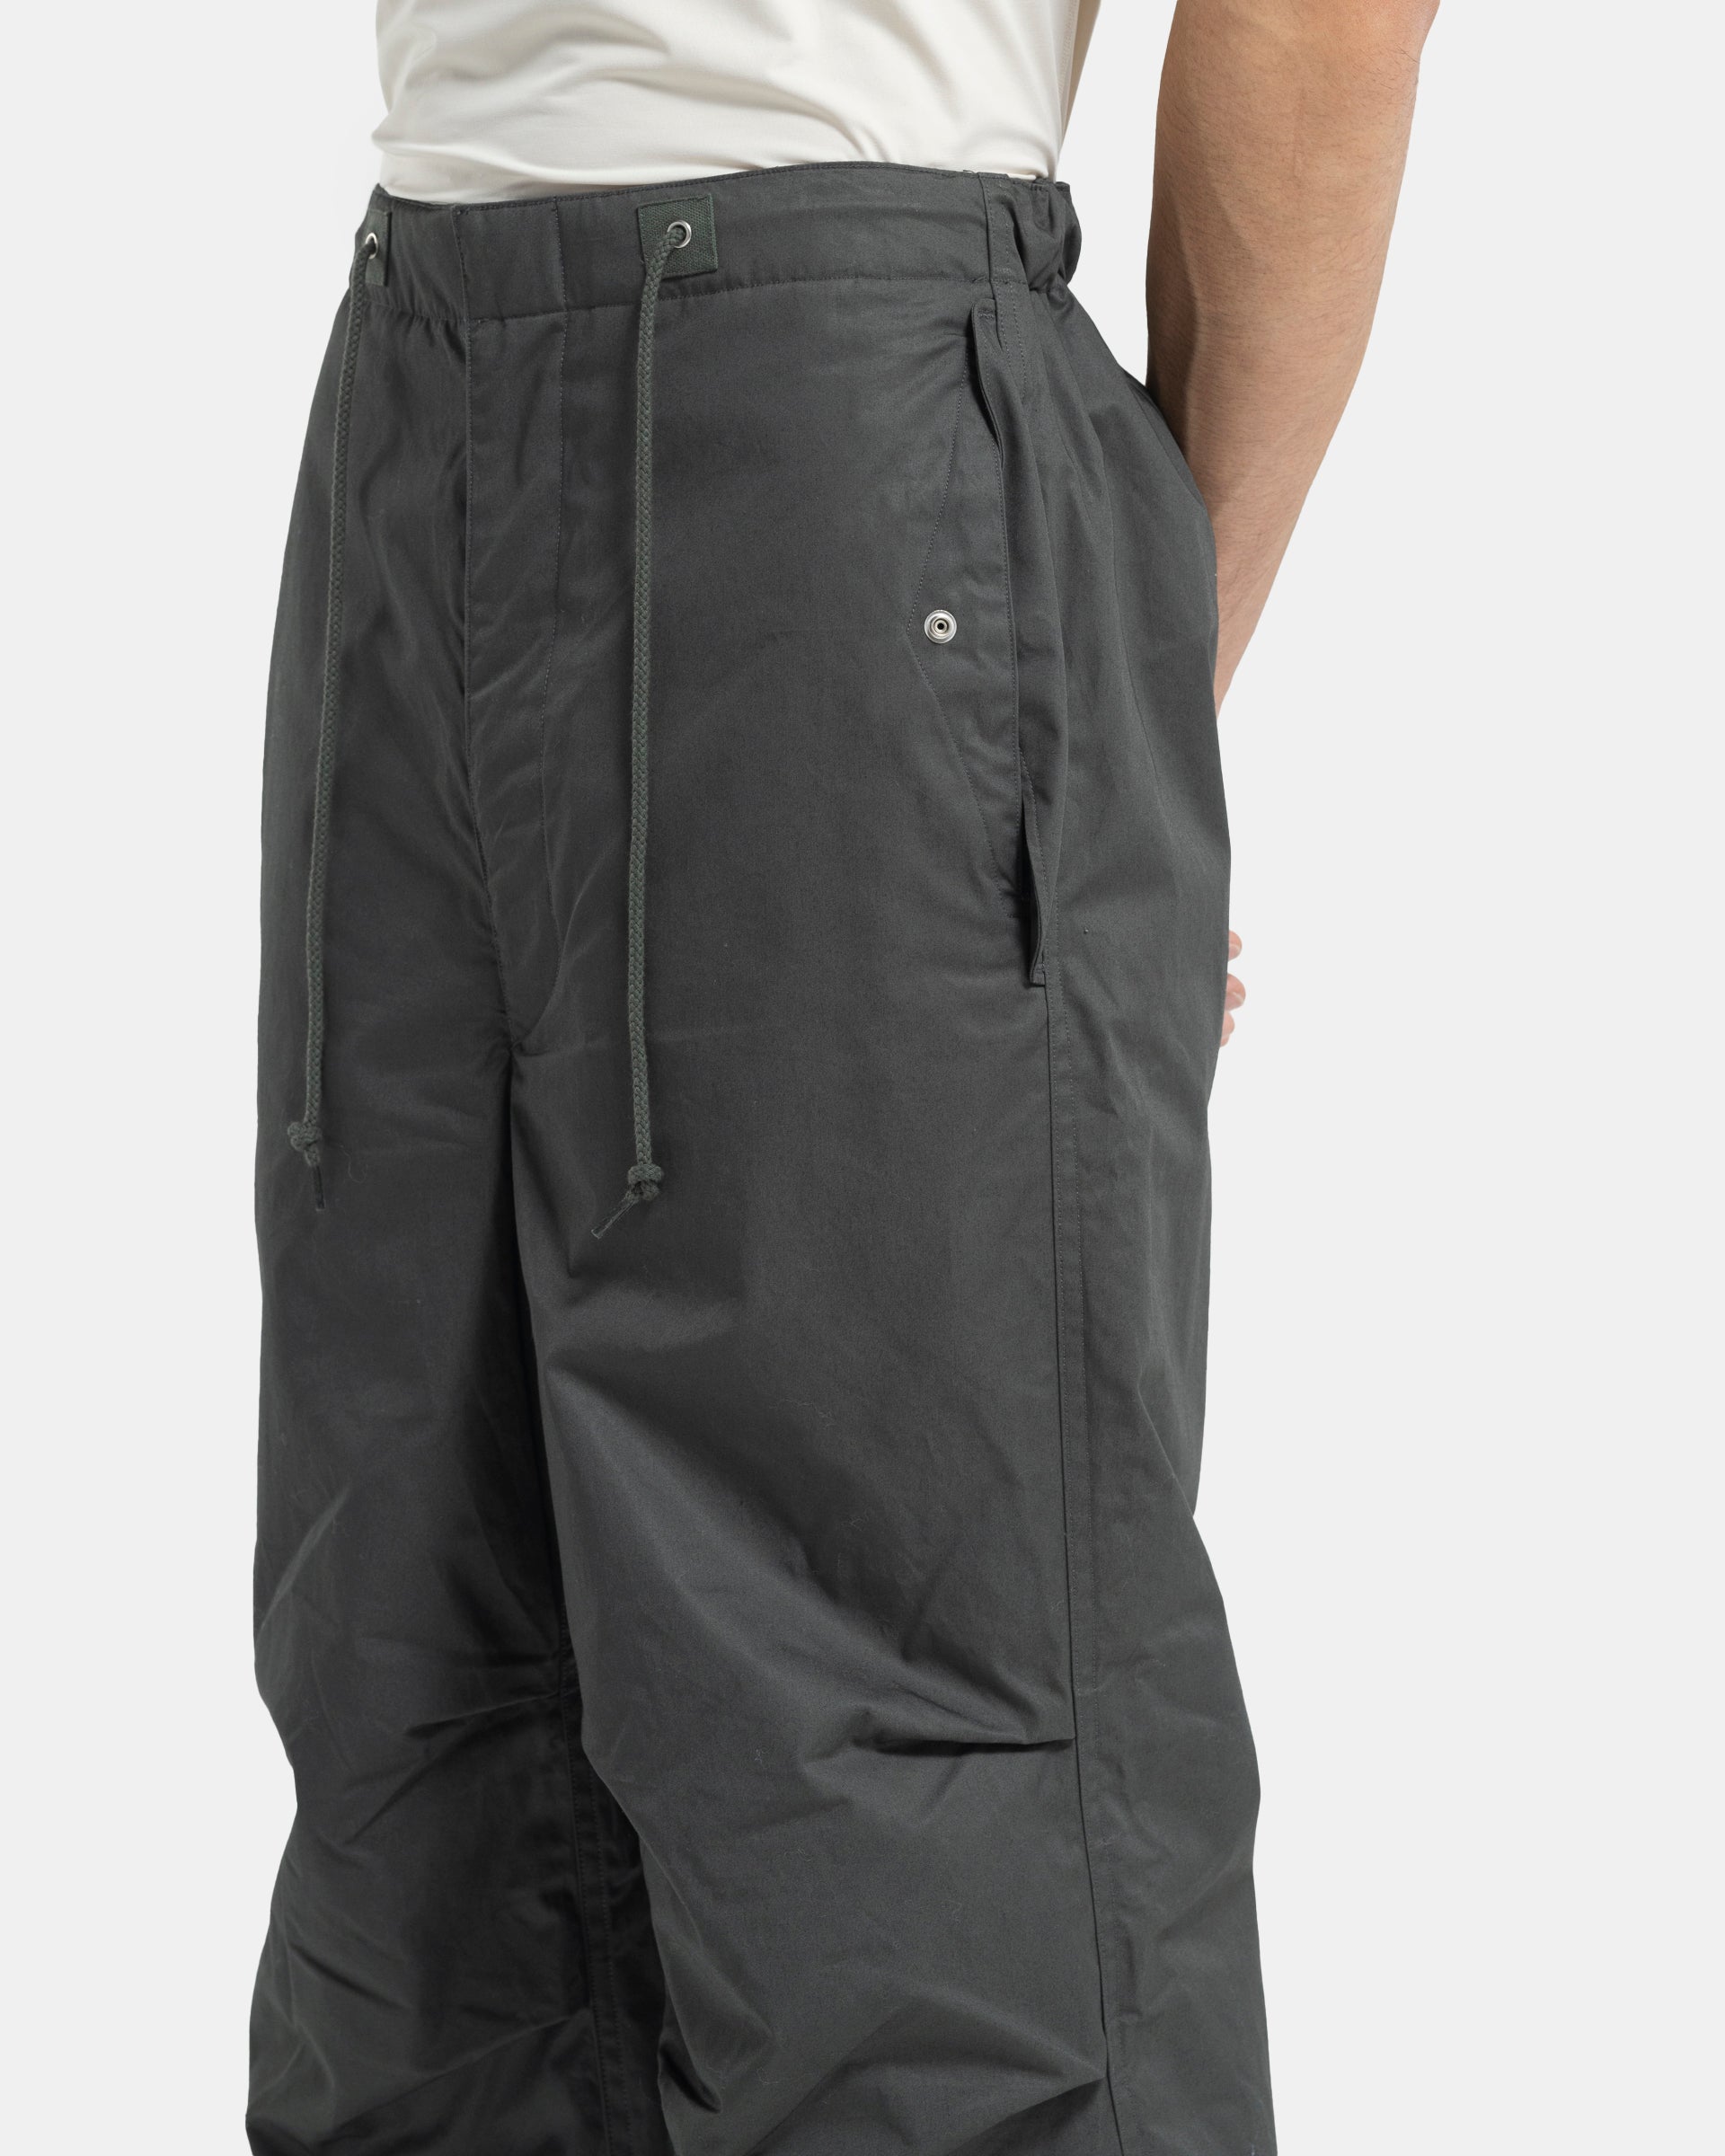 Insulated Pants in Moss Green